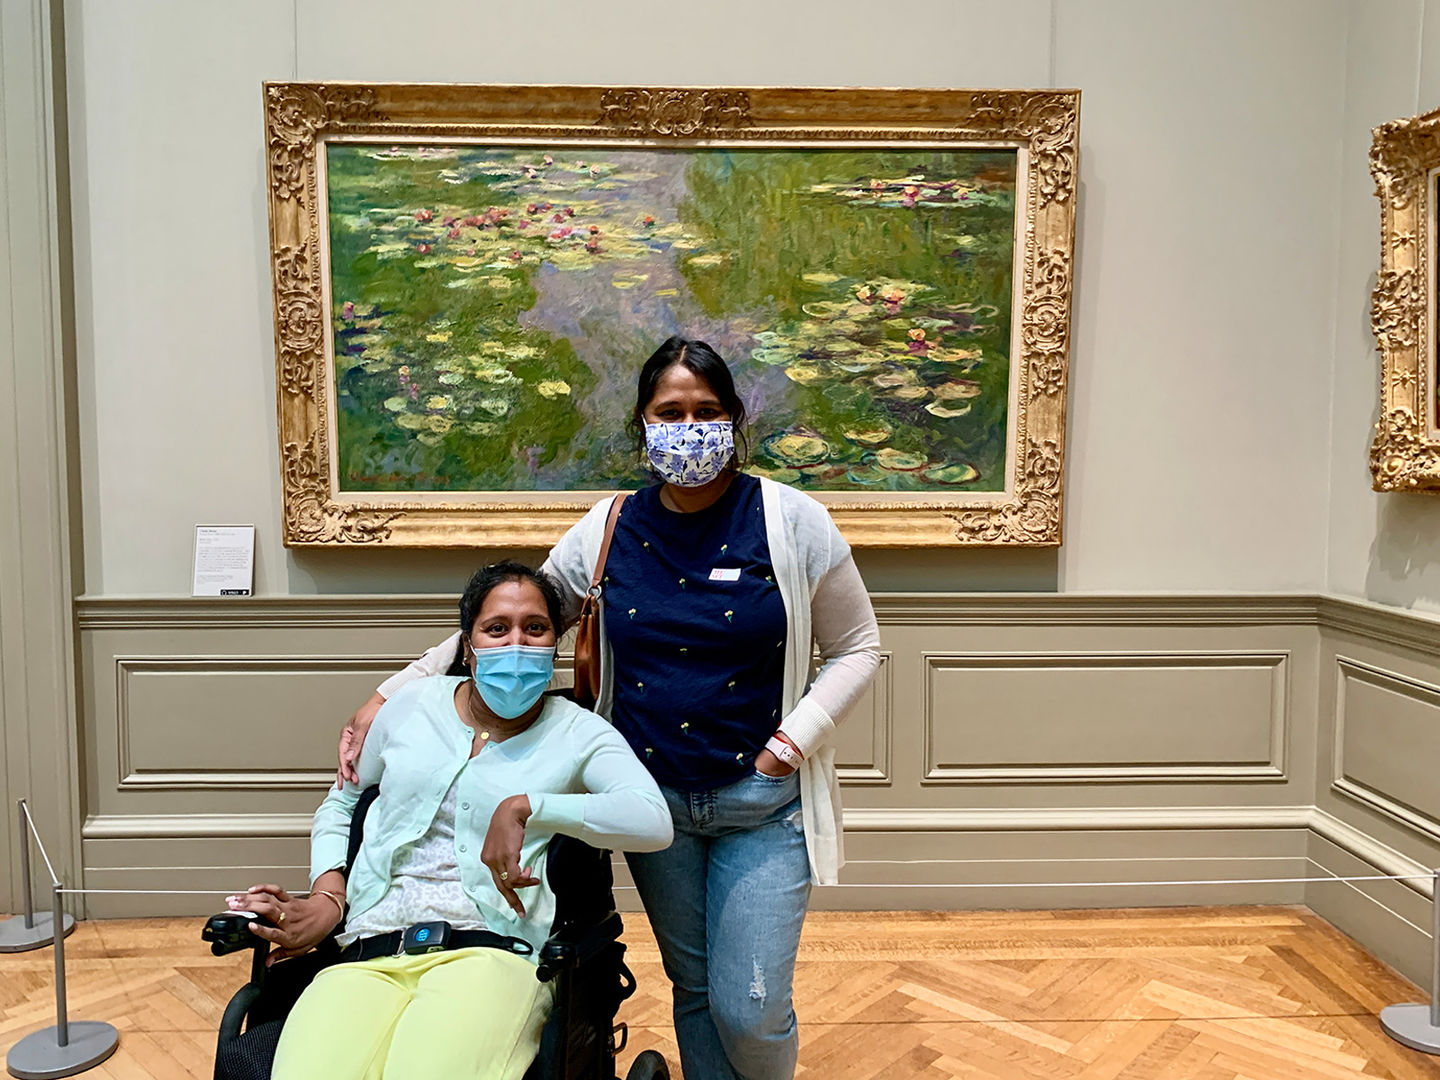 Portrait of two women, Annie and Lakshmee, in the European Painting galleries at The Met 5th Avenue. The women are medium-dark skinned and one of them is a wheelchair user. 